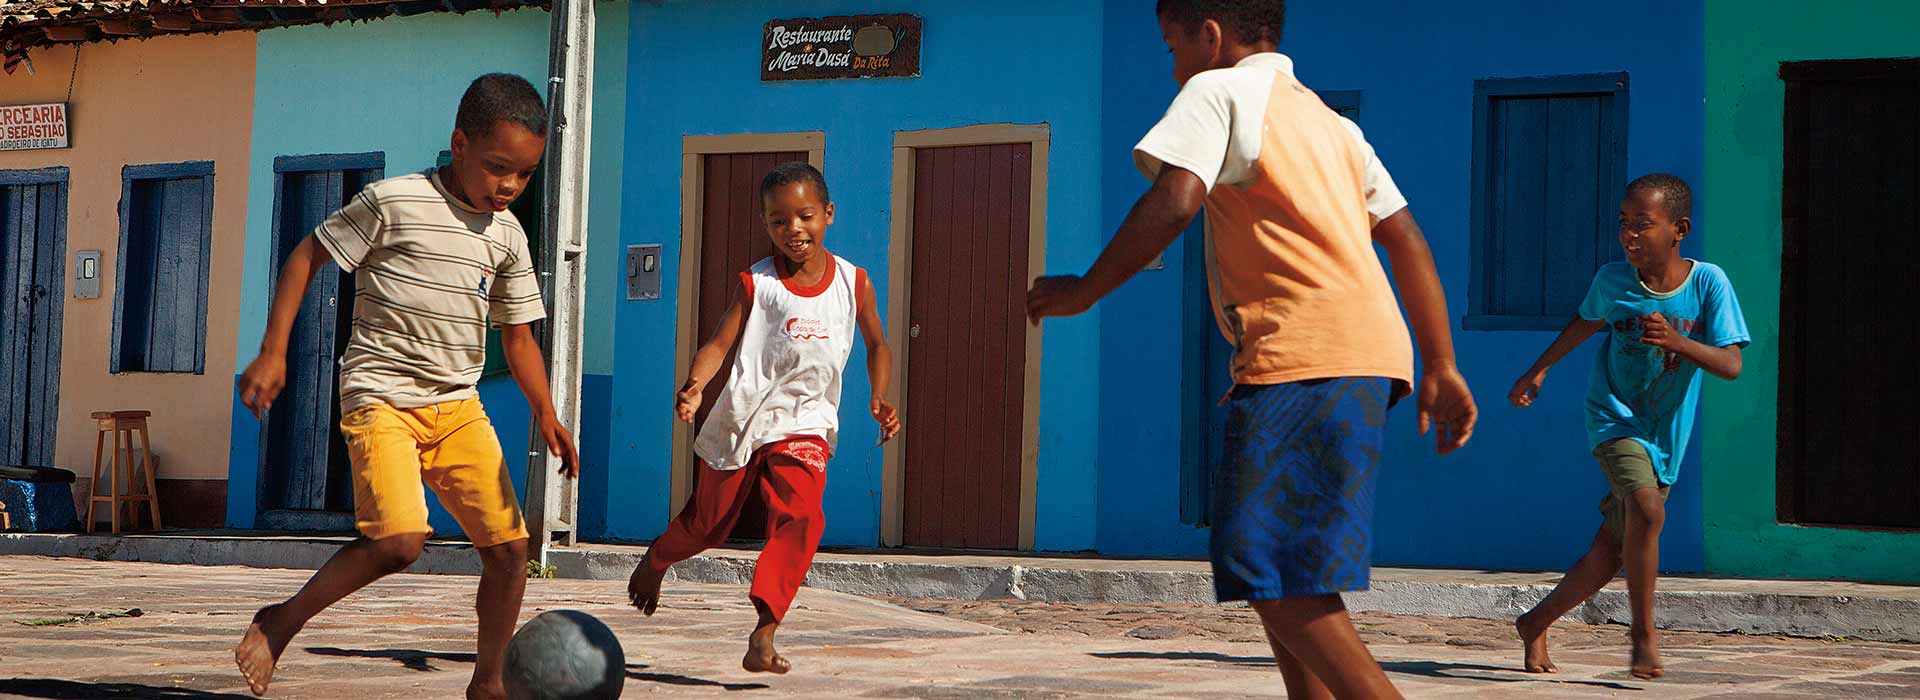 Boys playing football in the street